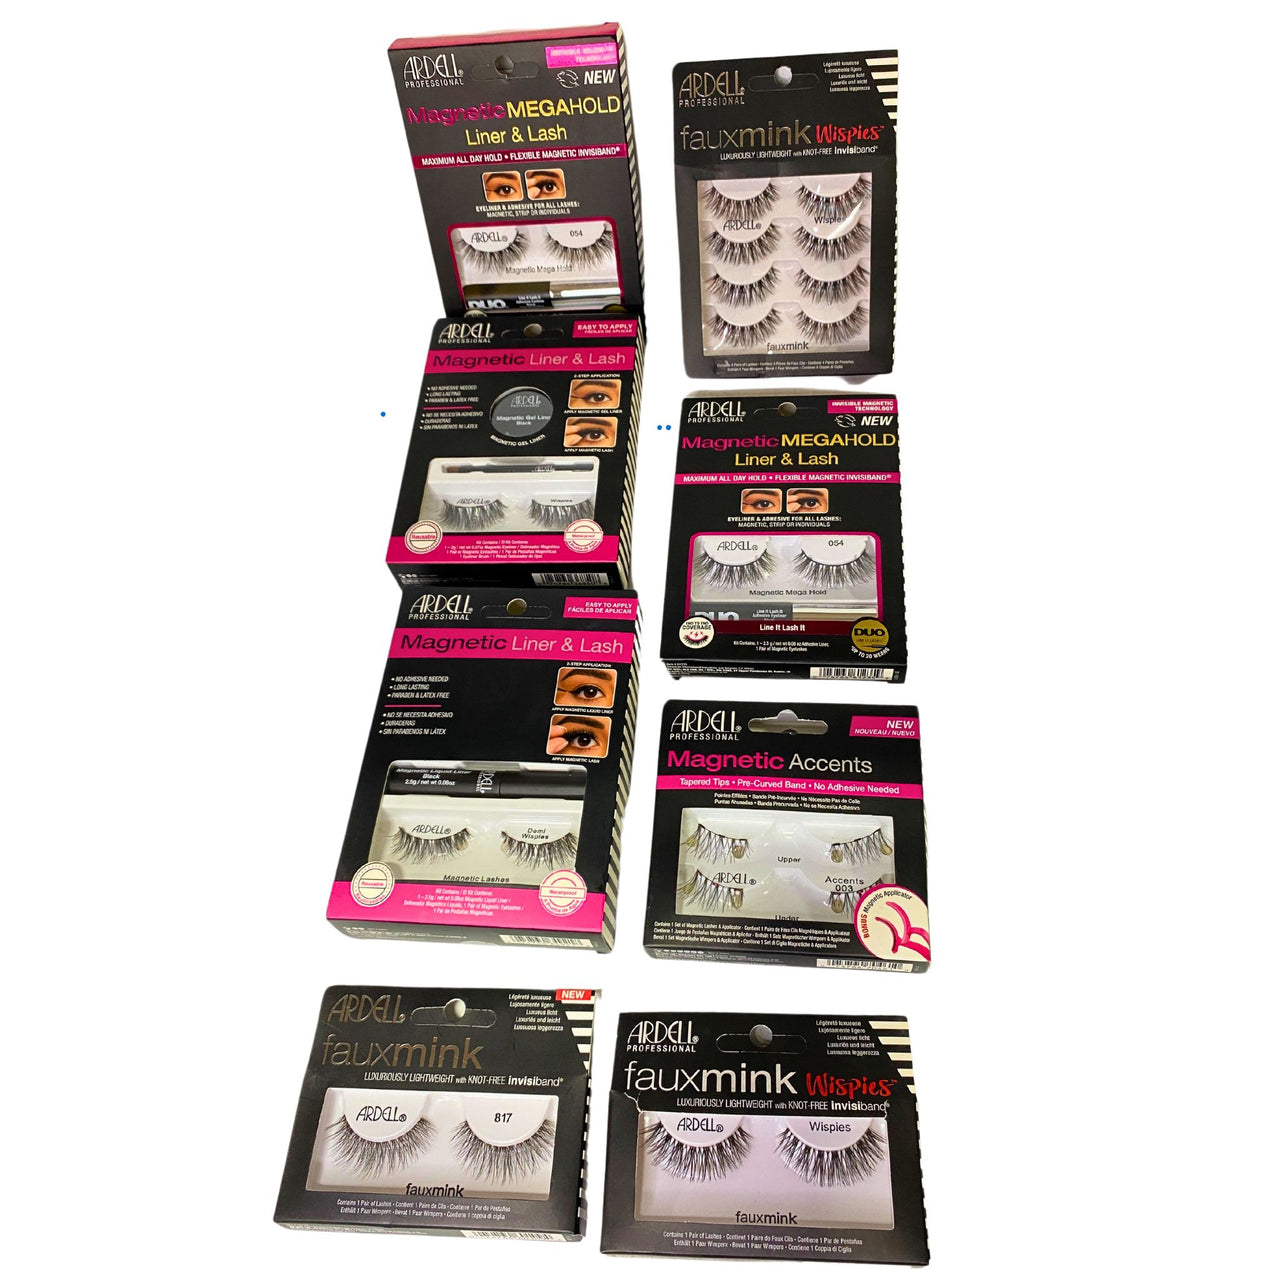 Ardell Lashes Mix includes Magnetic Lashes & Adhesive Lashes